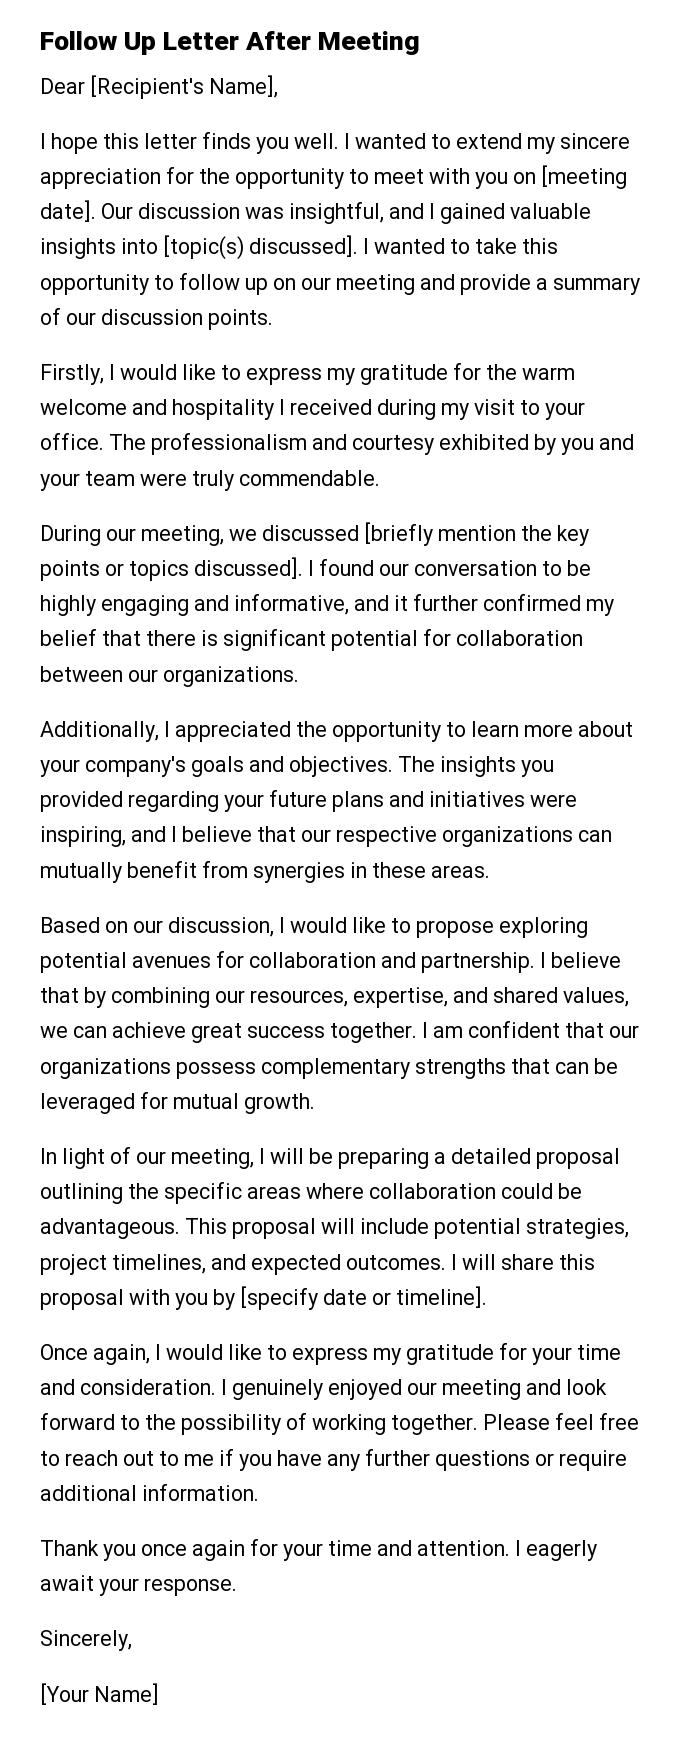 Follow Up Letter After Meeting